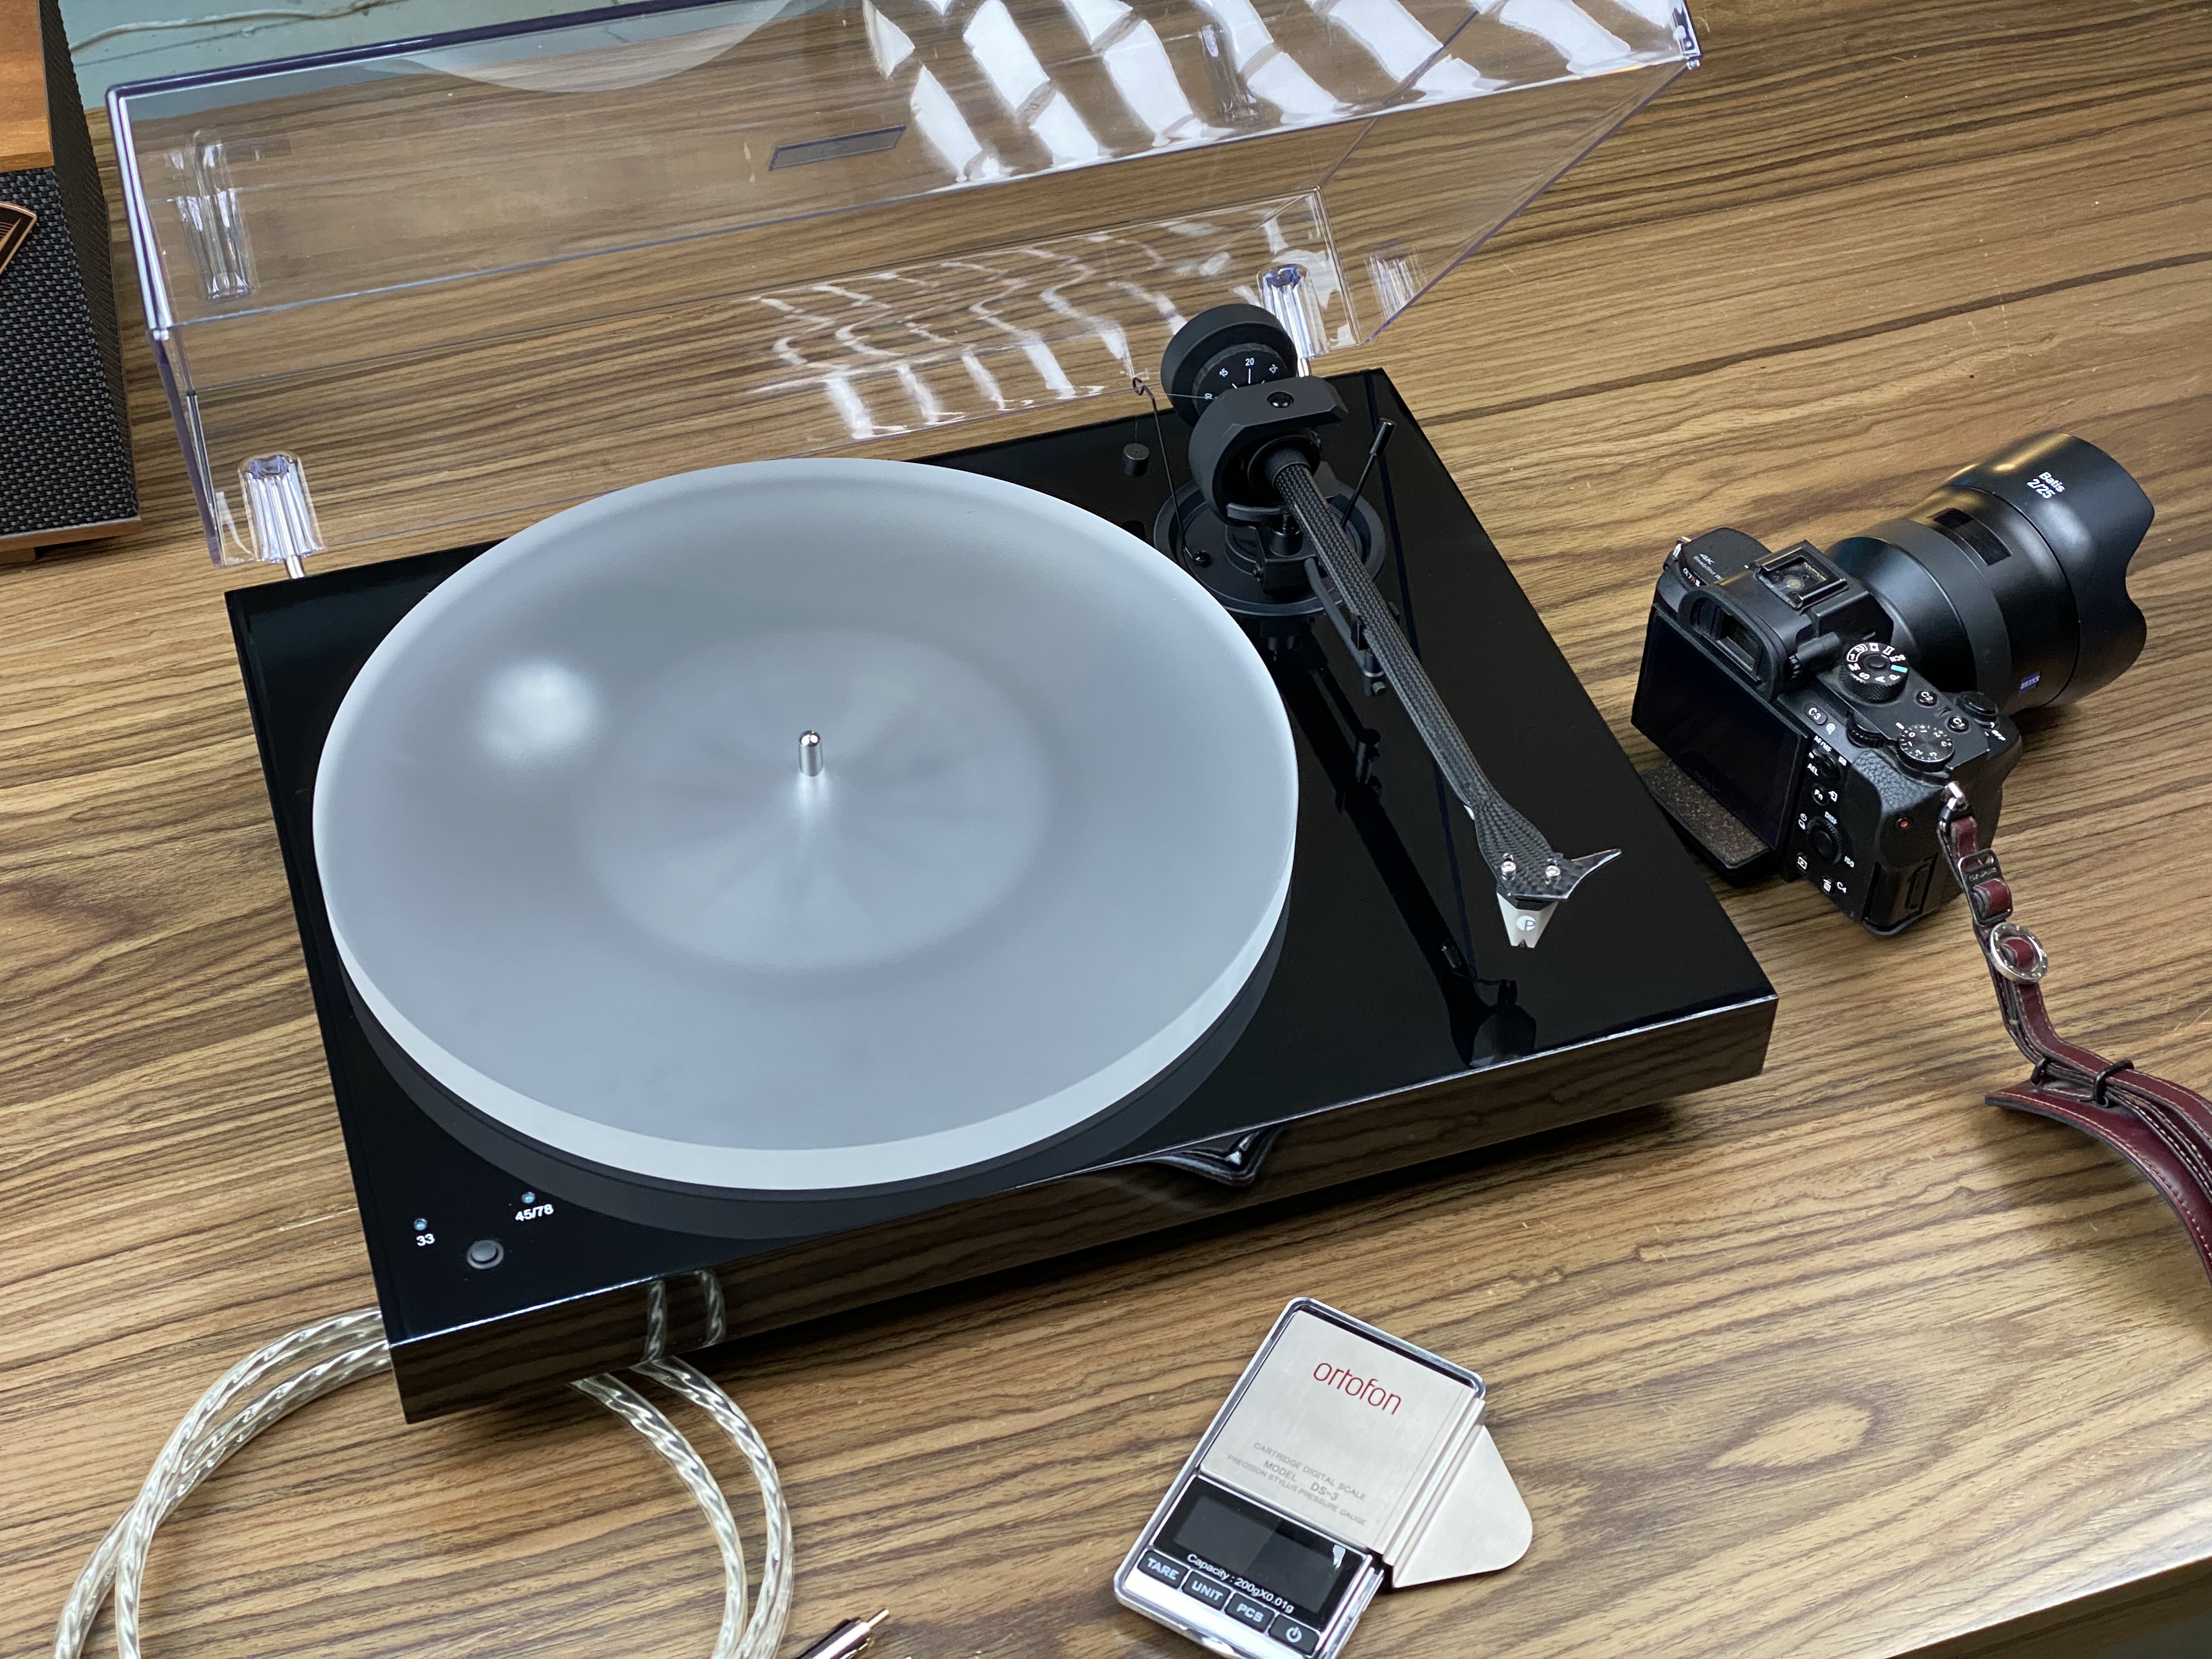 tinhte_project_x1_turntable_shot_on_iphone (1).jpg